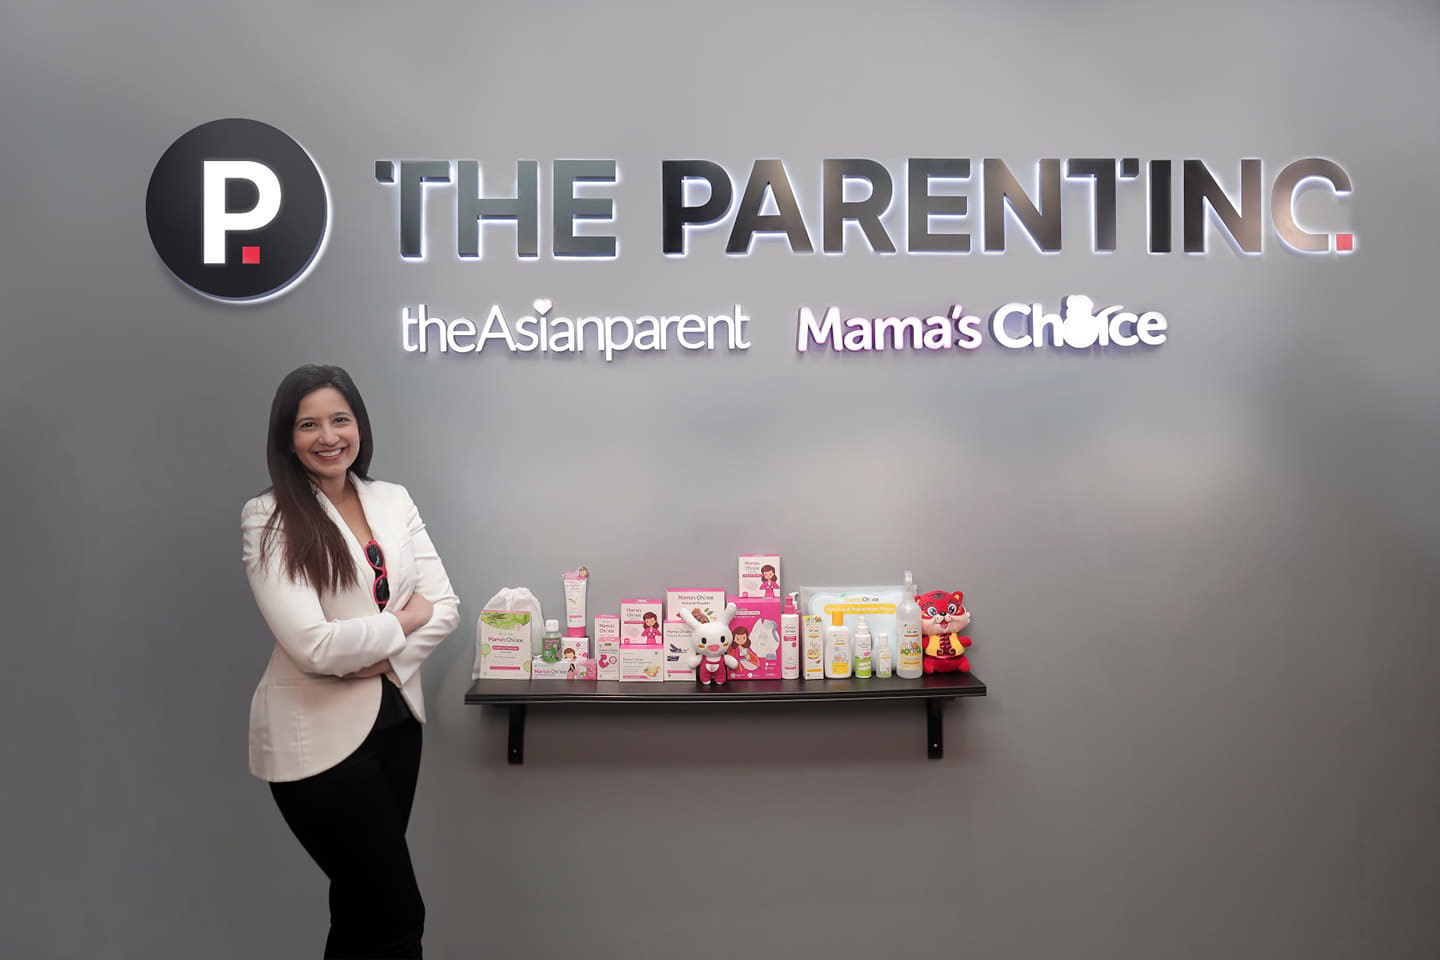 Roshni Mahtani Cheung, group CEO and founder of The Parentinc